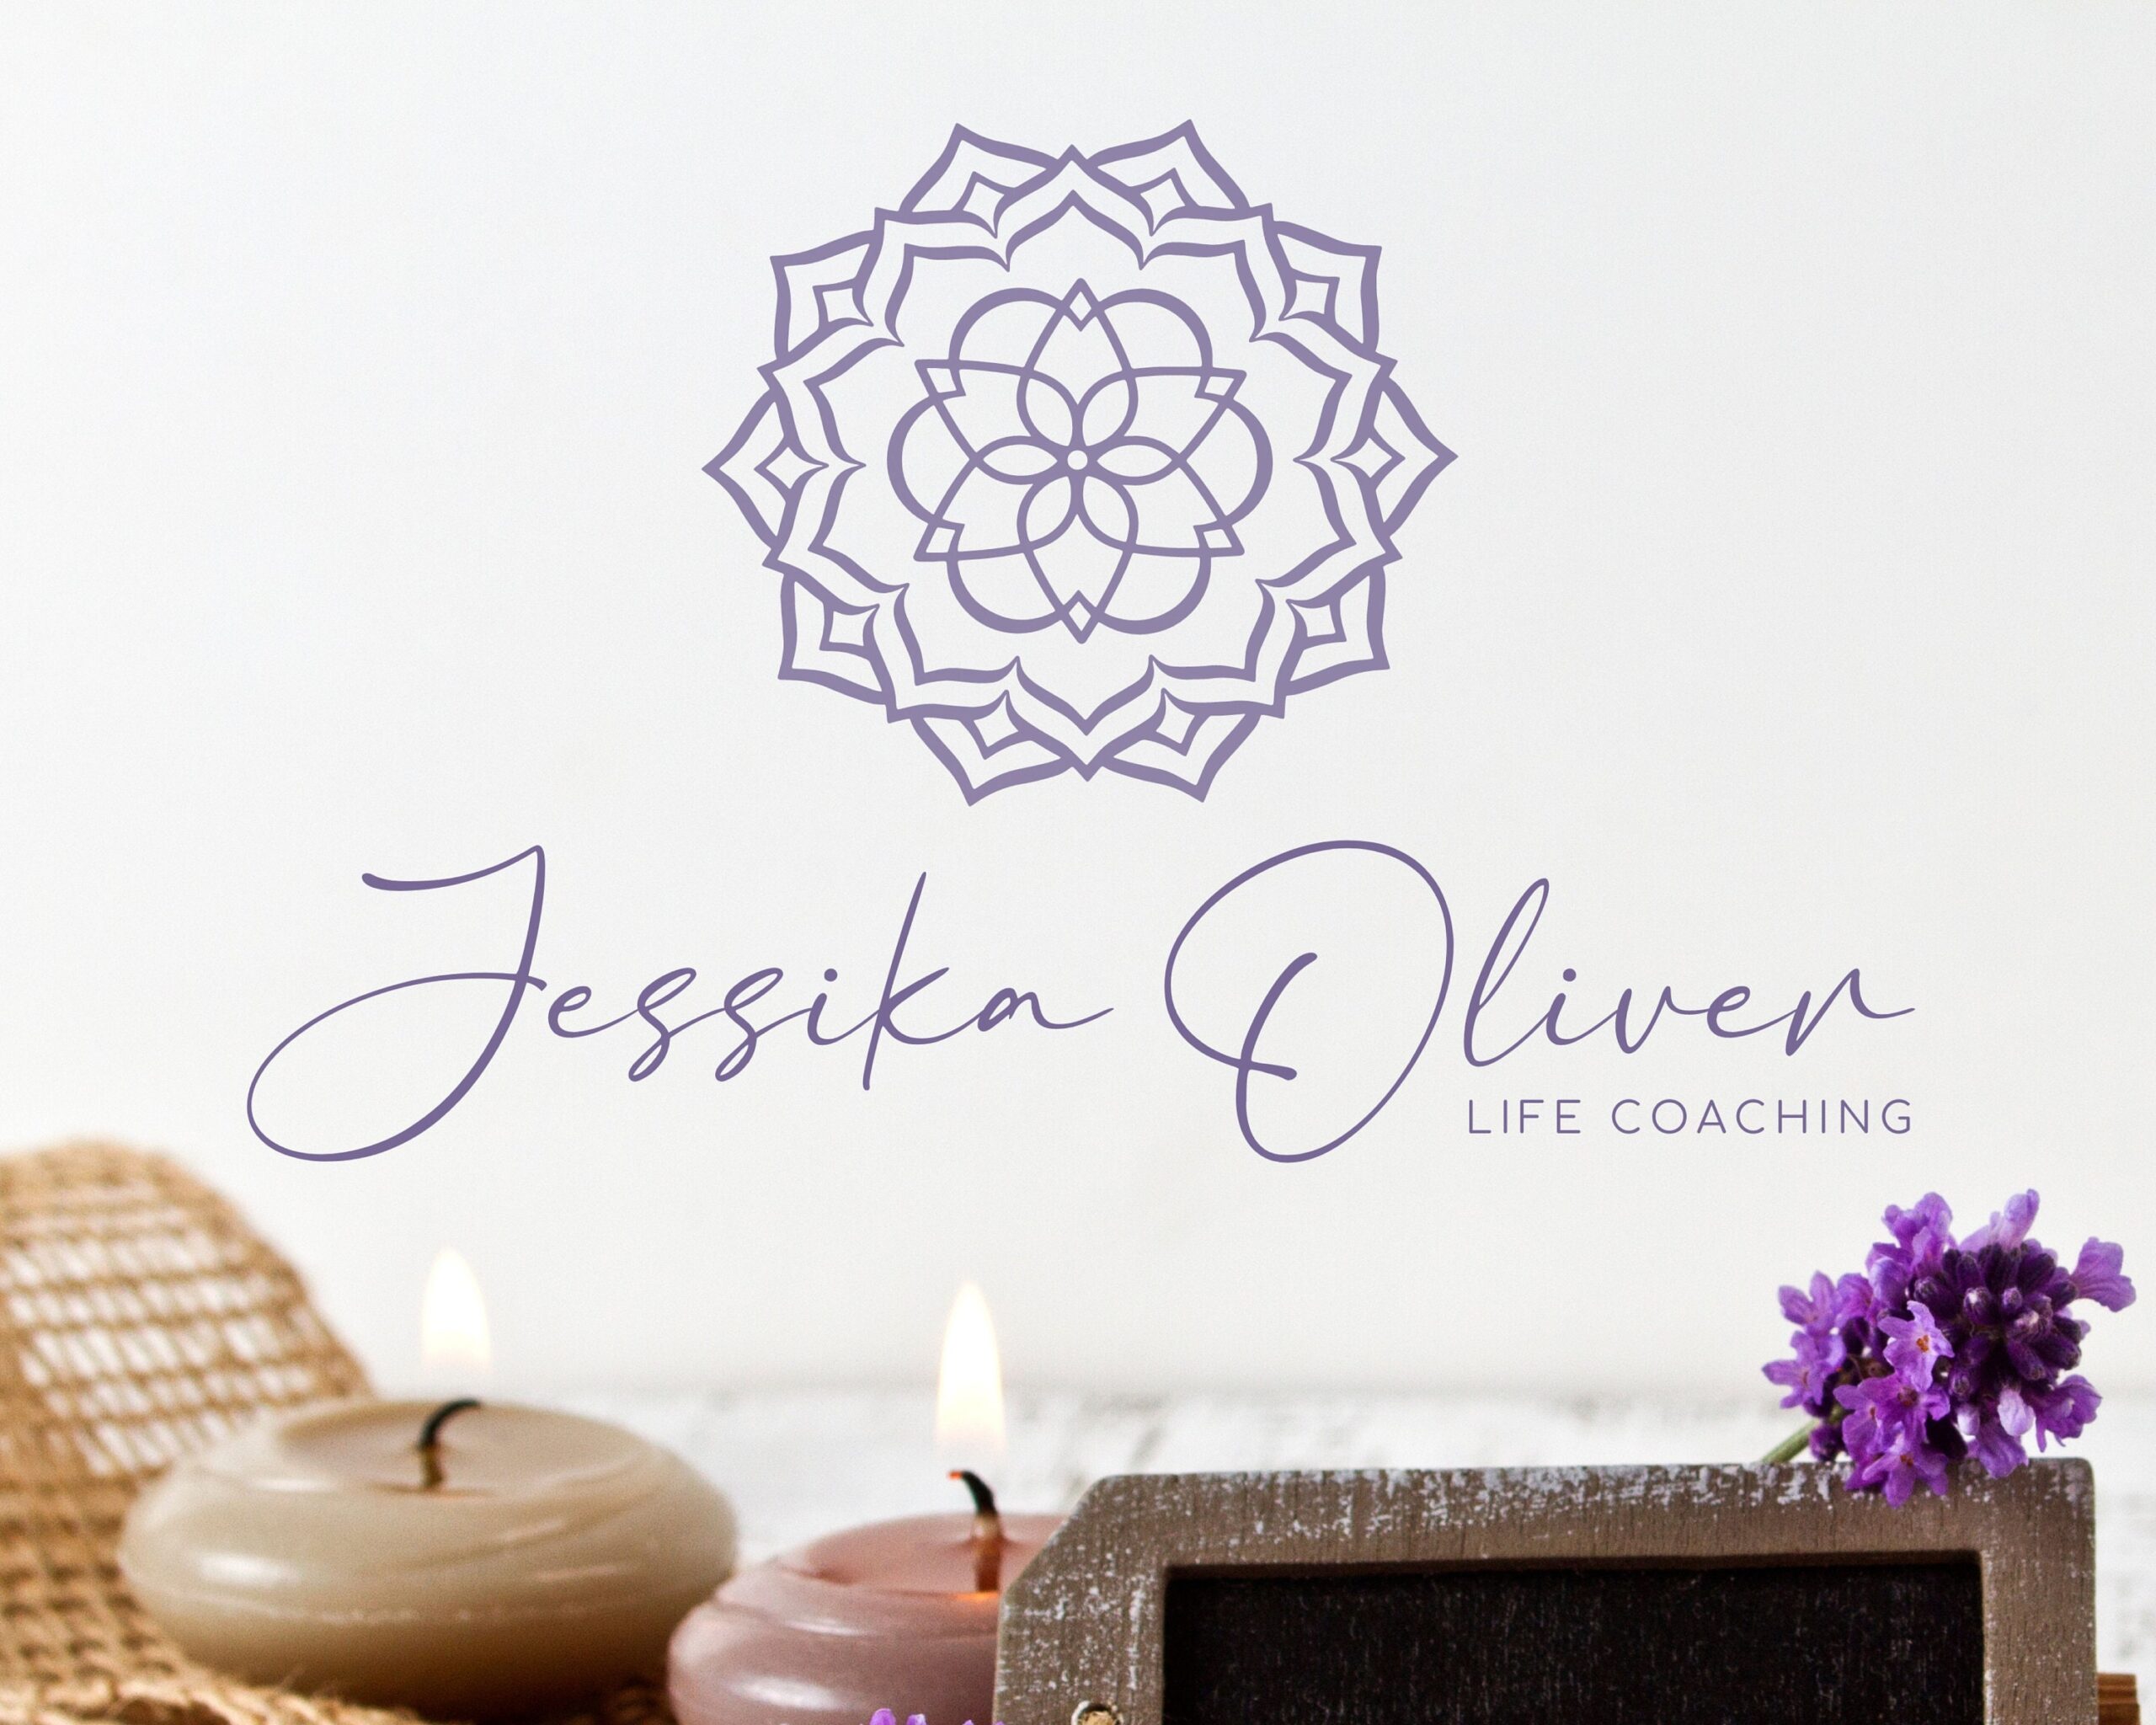 Lotus Flower Sacred Geometry Logo Design is a Geometric Art Design - I will add your name and tagline - All Designs are Included